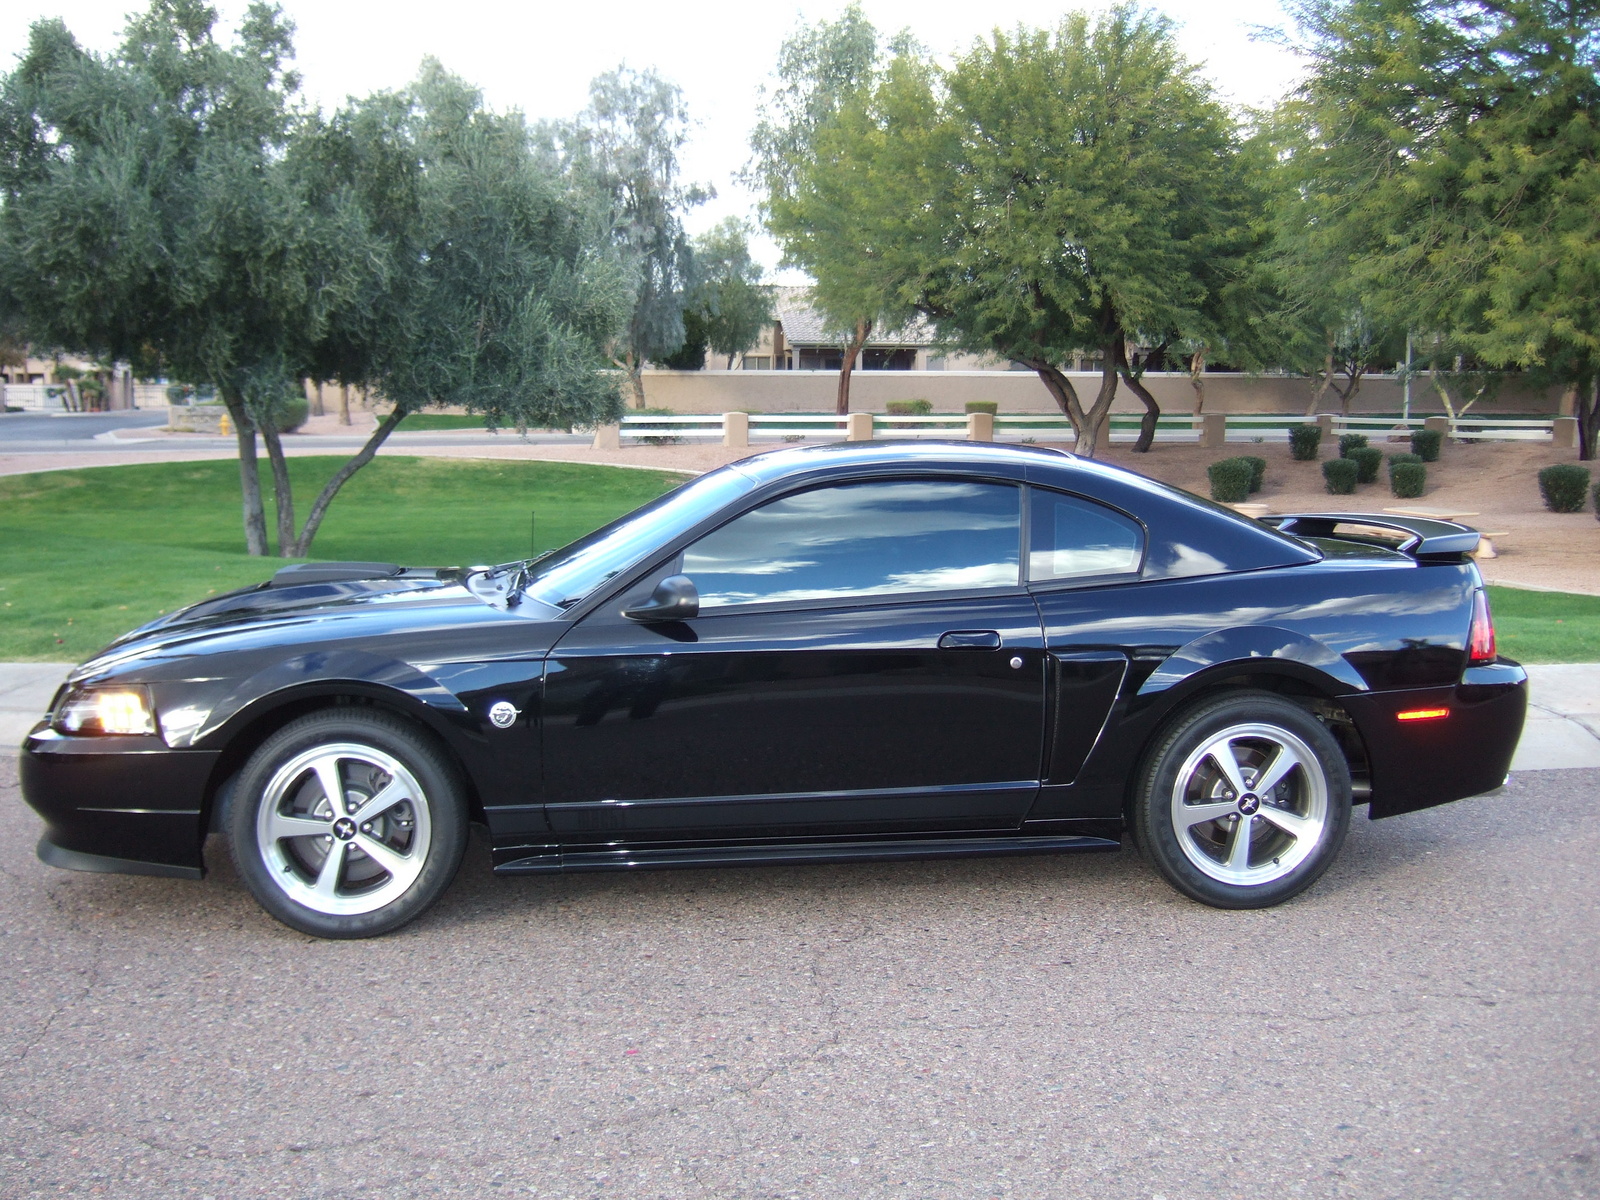 2004 Ford mustang mach 1 performance #3